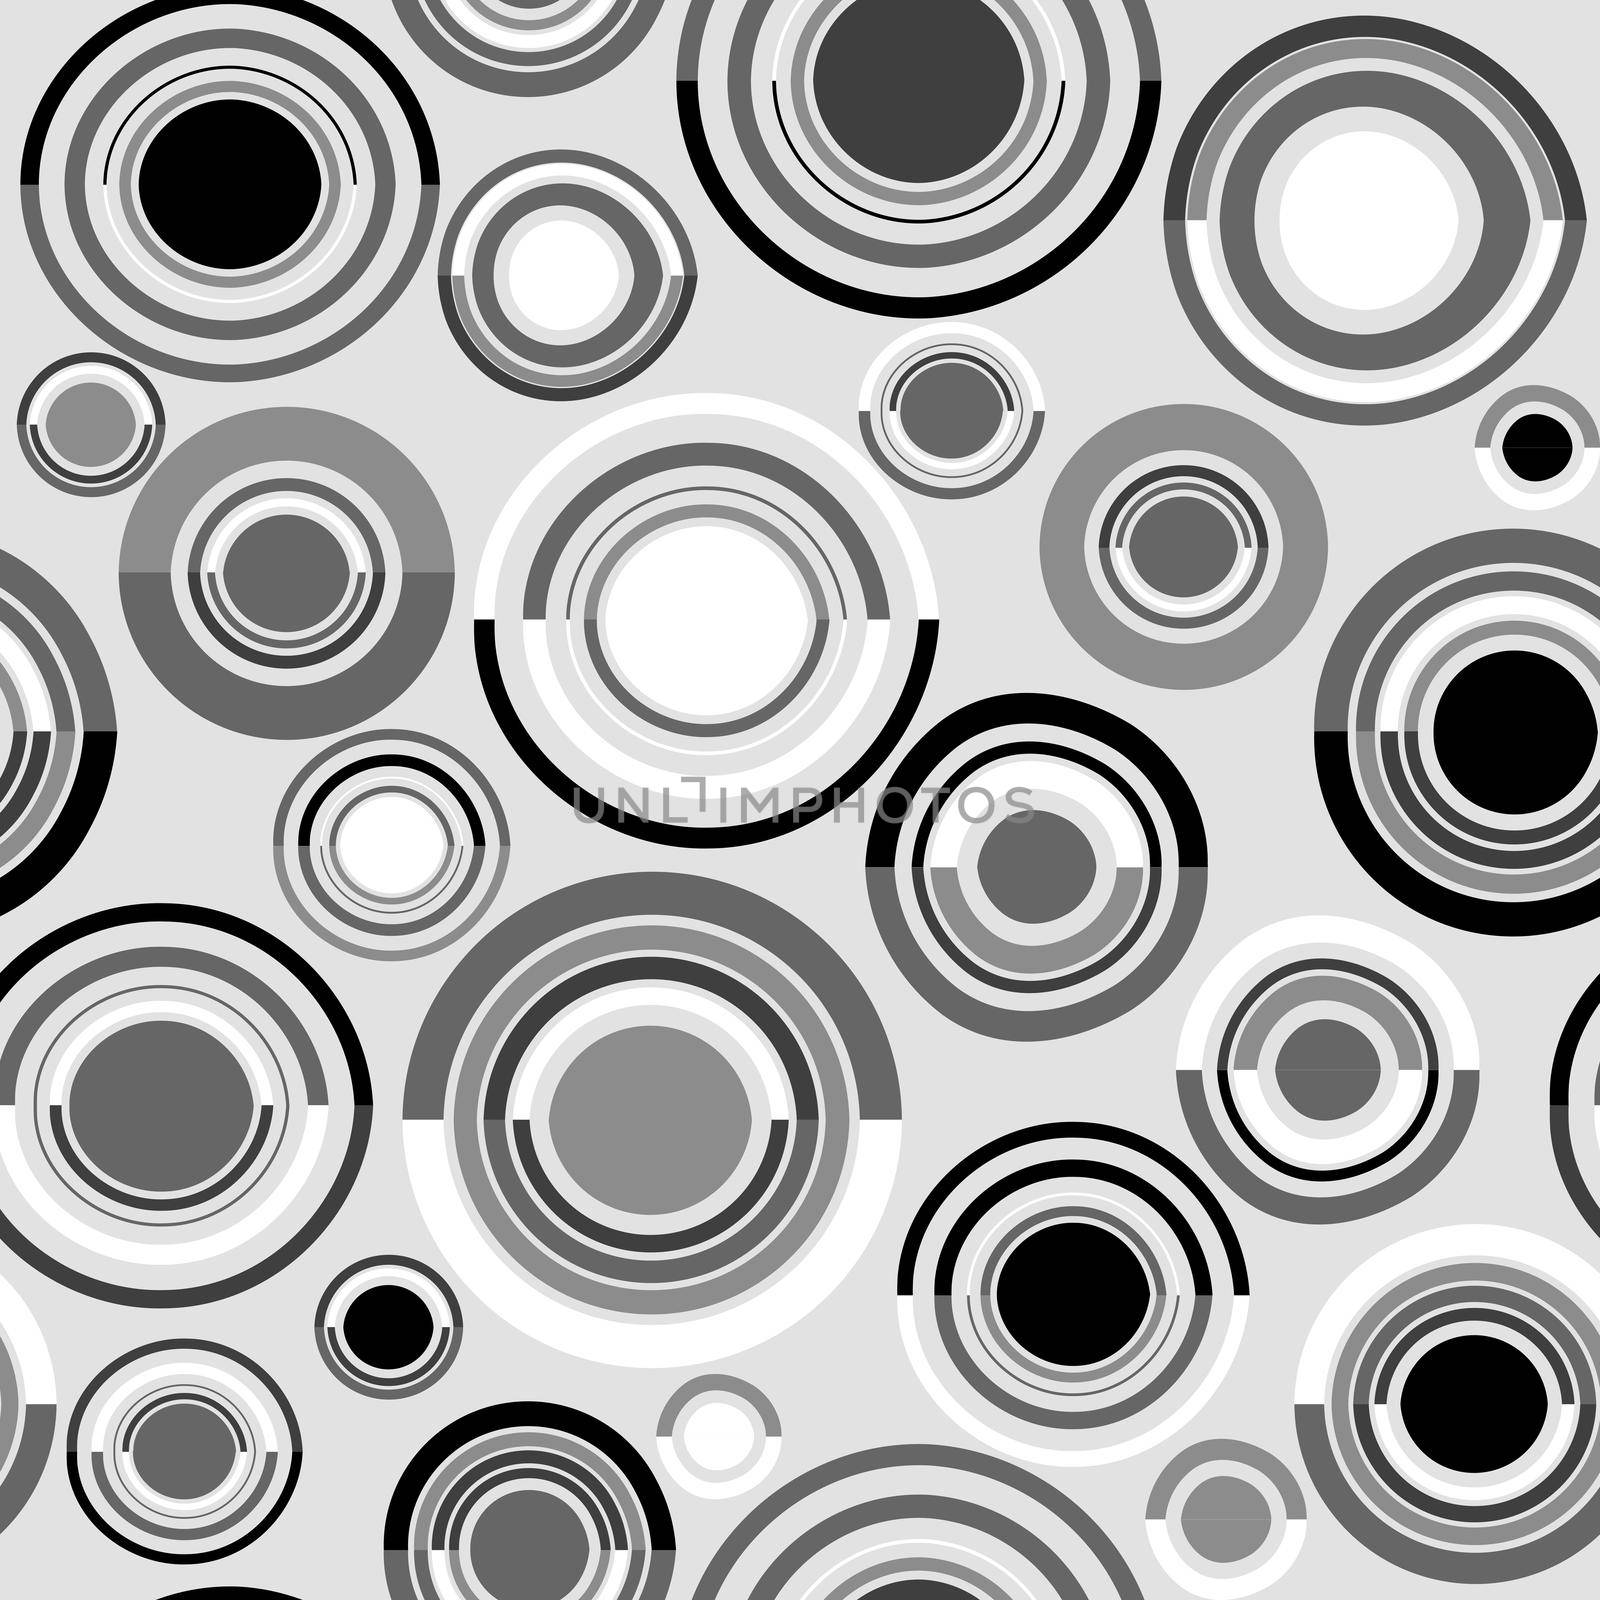 Black and white seamless background with circles and round shapes